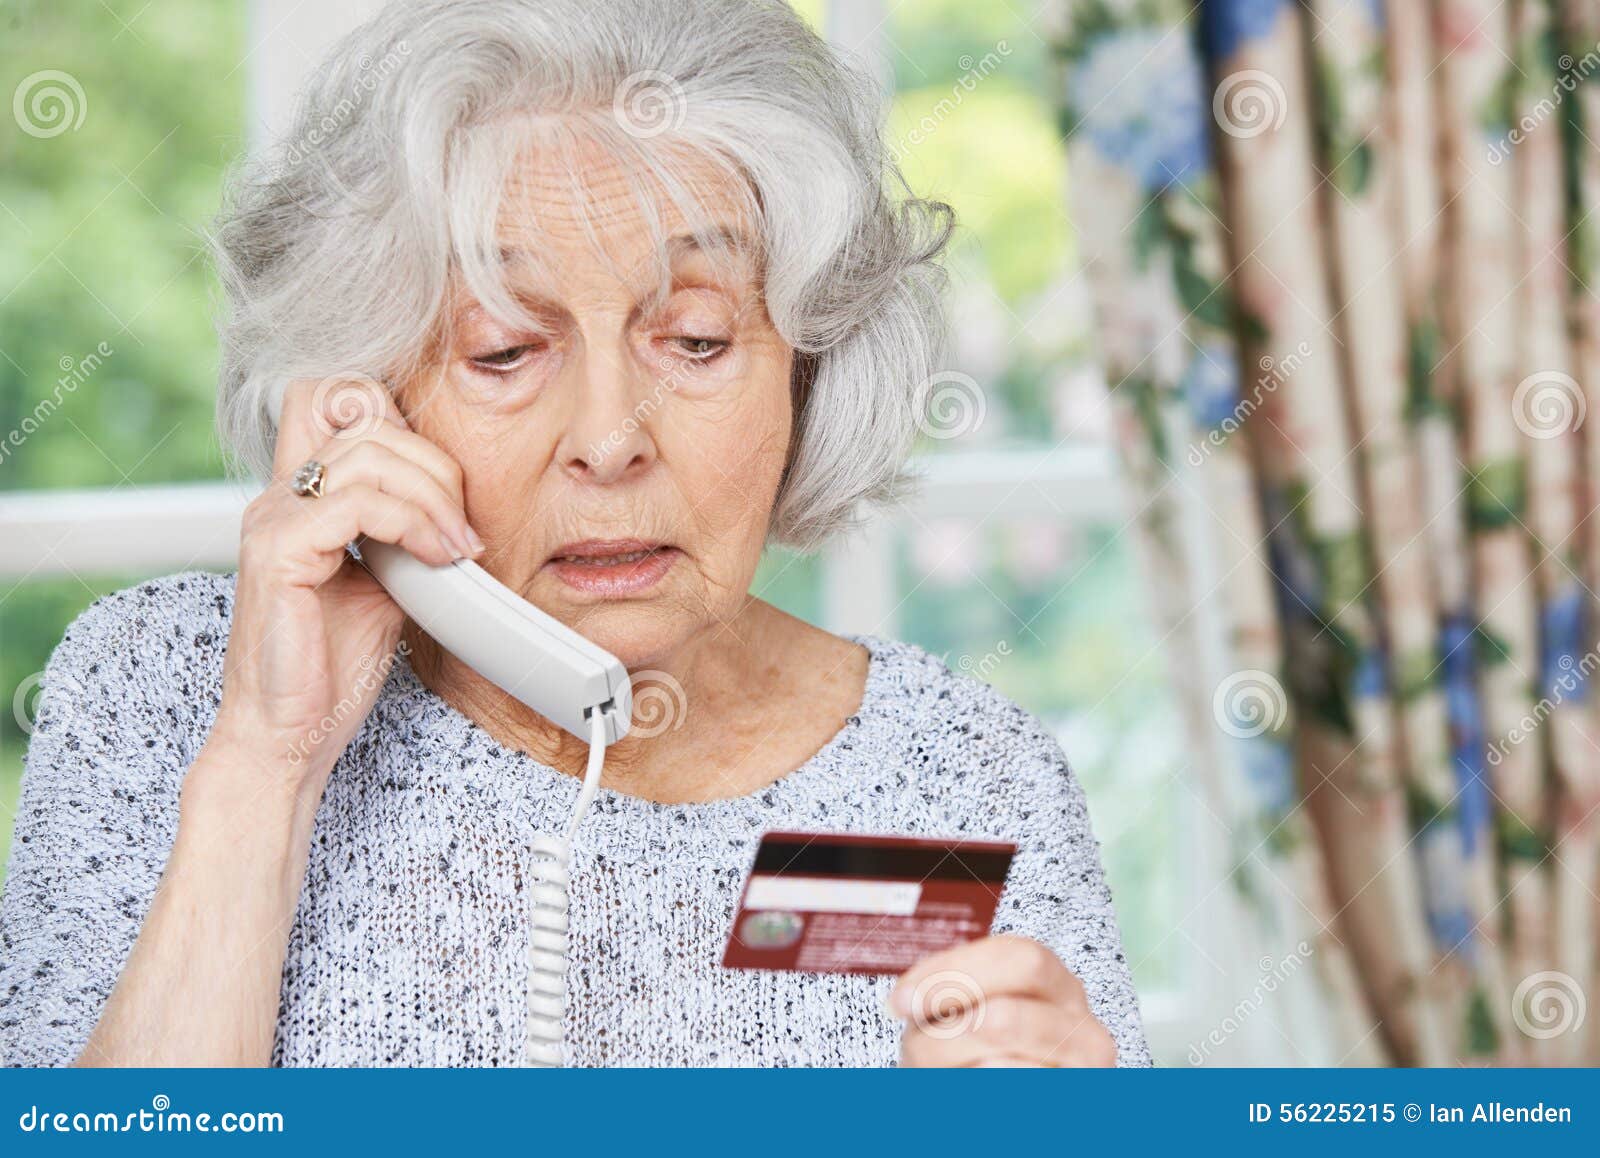 senior woman giving credit card details on the phone